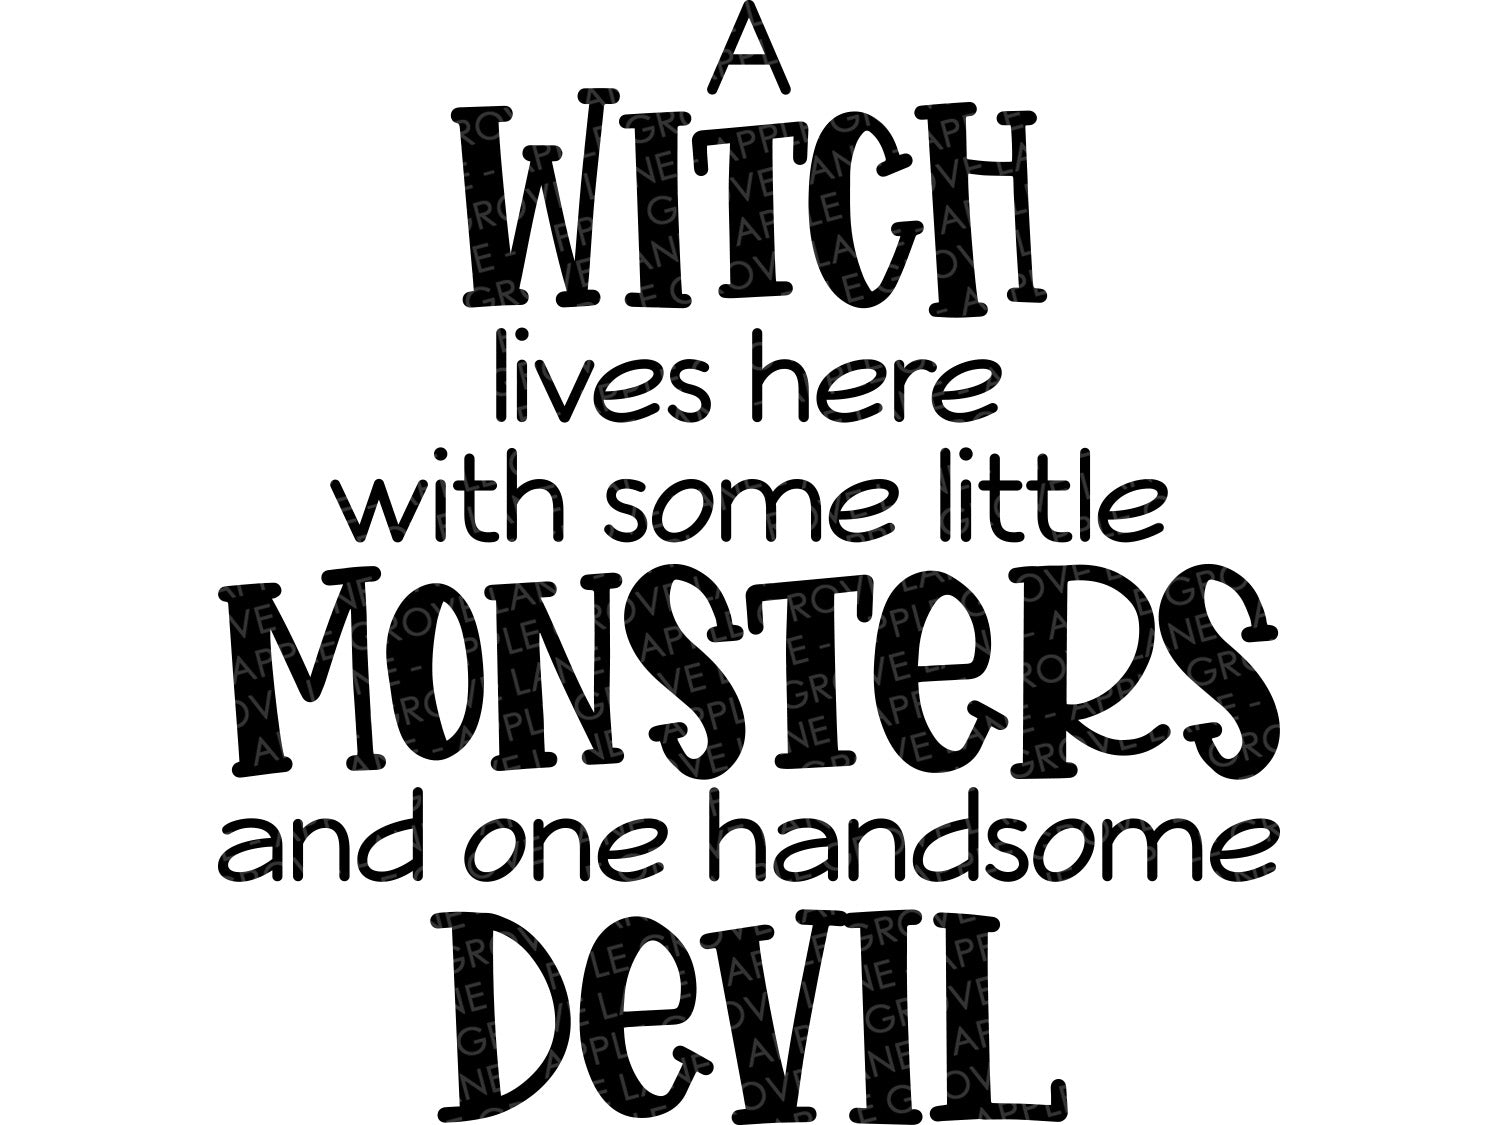 Halloween Svg - Witch Lives Here Svg - With Her Little Monsters Svg - One Handsome Devil - Halloween Sign Svg - Halloween Witch Svg